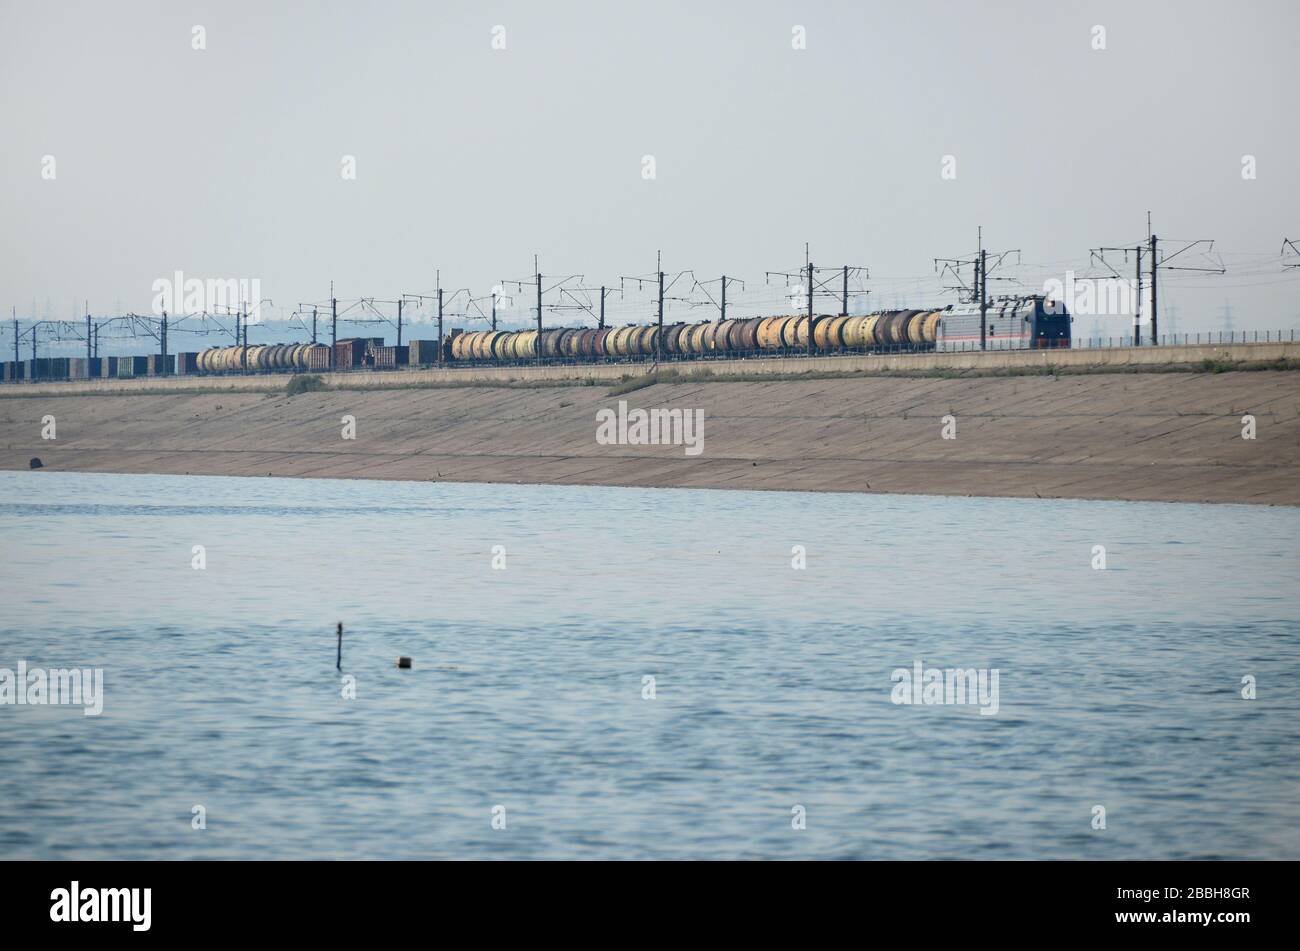 A class TEP 70 diesel locomotive with oil tanker wagons on the hydroelectric dam of Bratsk, Russia. This the BAM railway line, Baikal Amour Magistral. Stock Photo